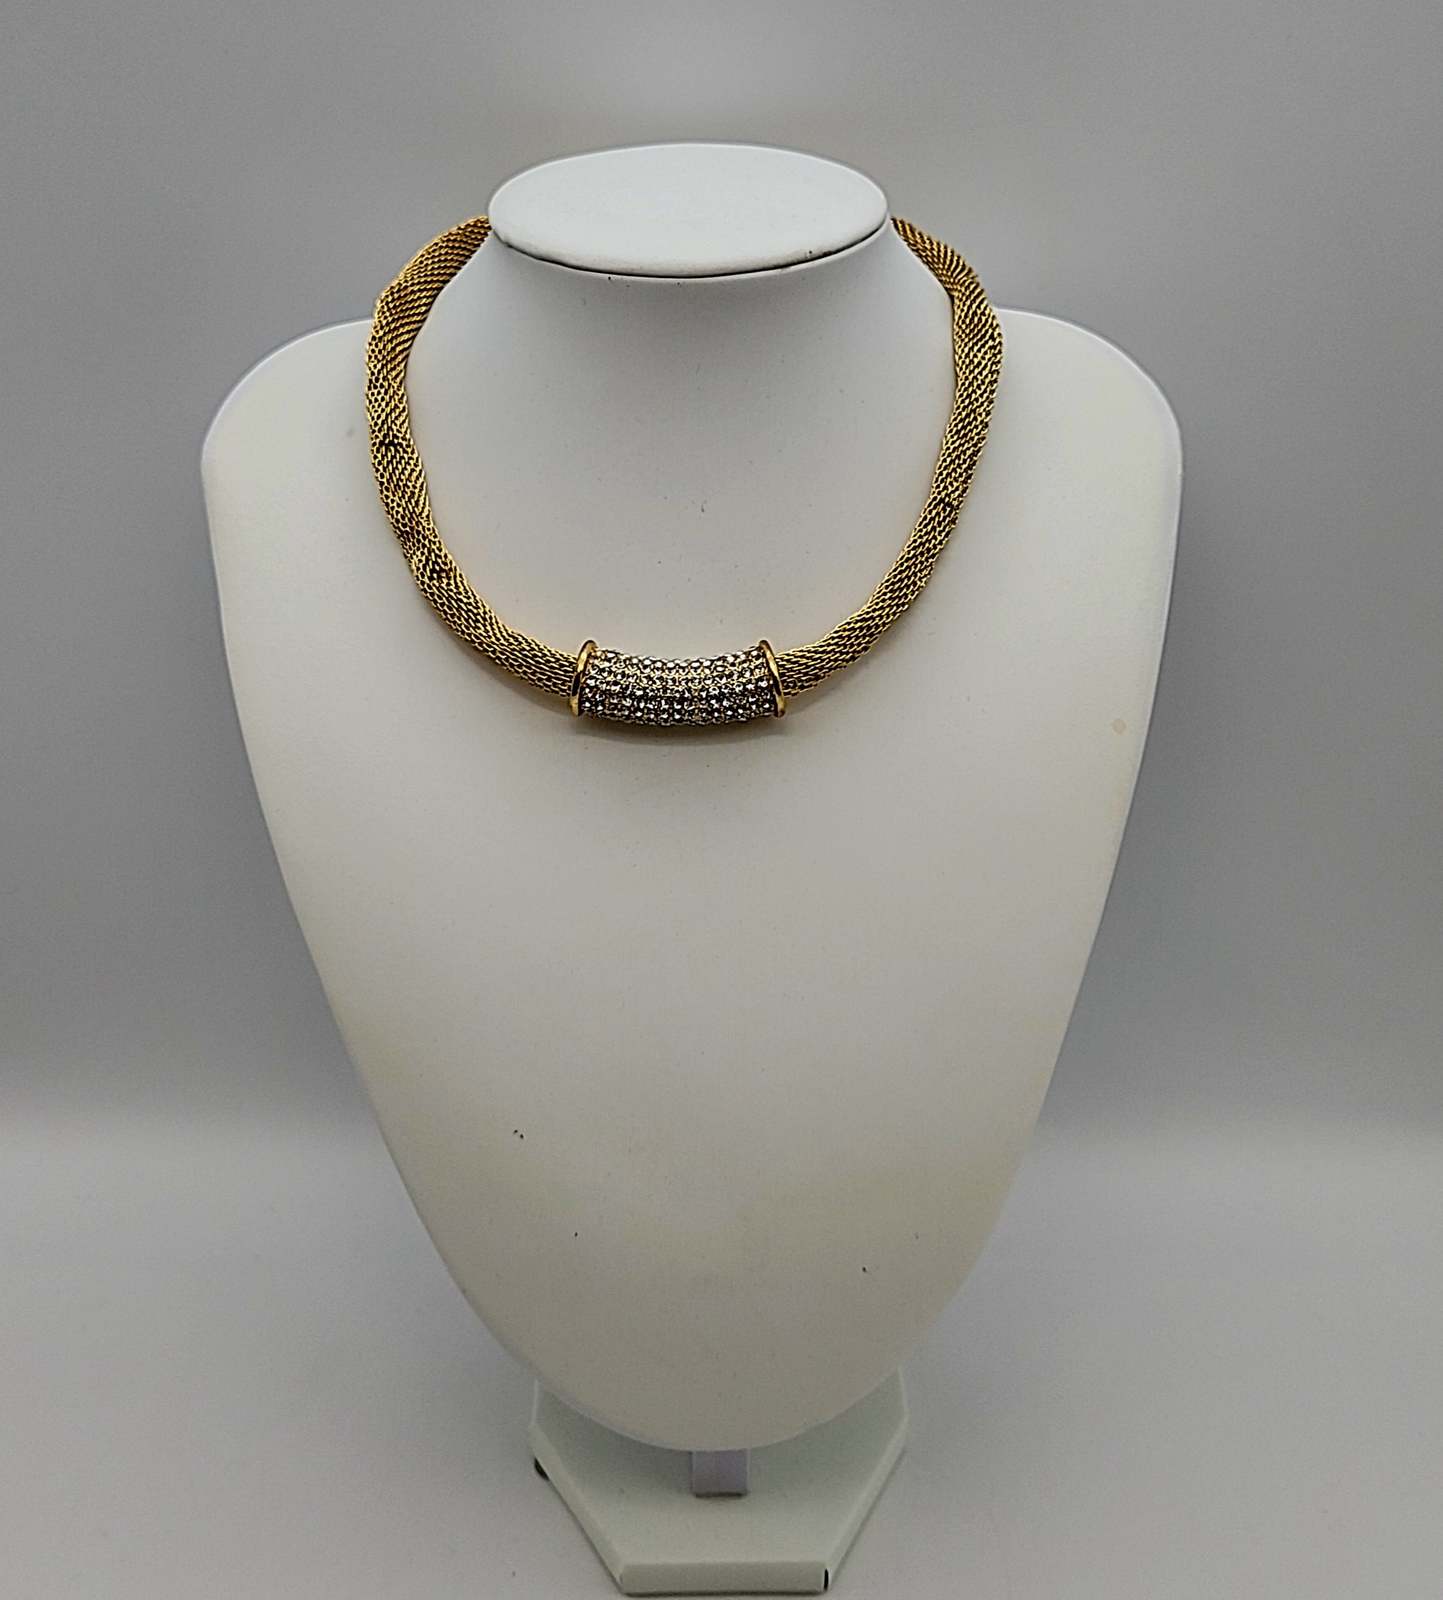 Primary image for Charter Club Pave Tunnel Mesh Collar Necklace